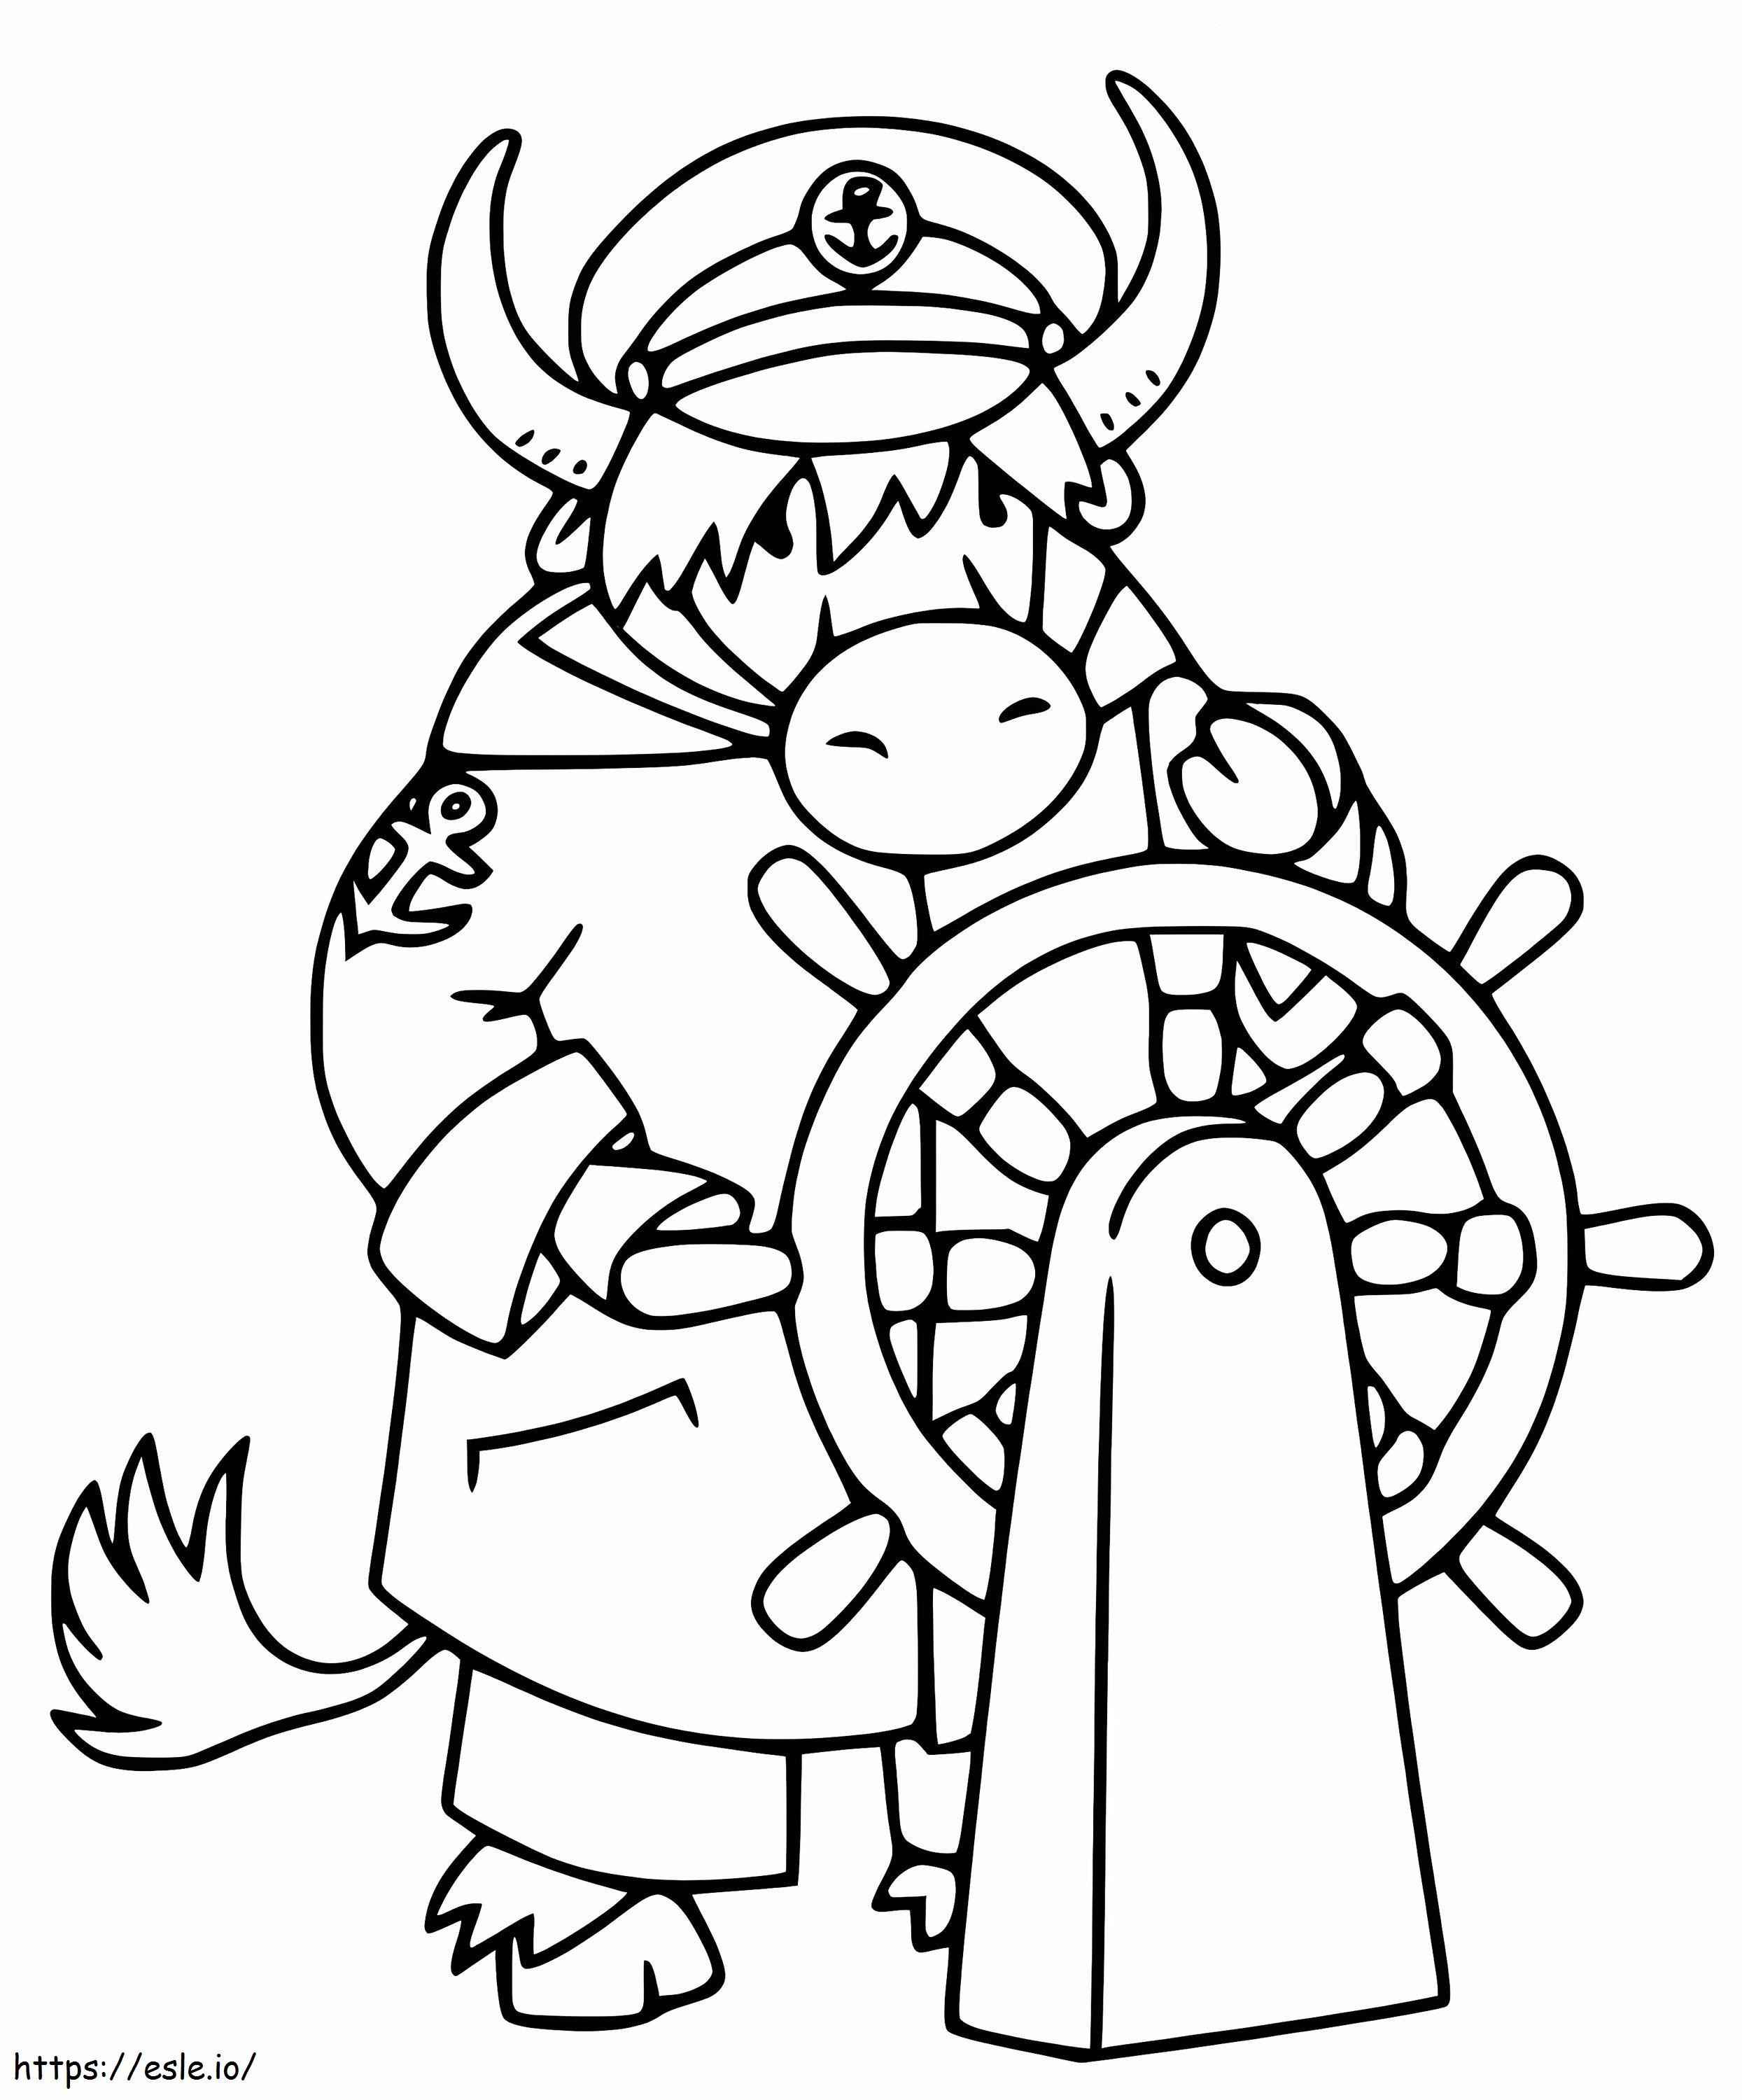 Captain Yak coloring page